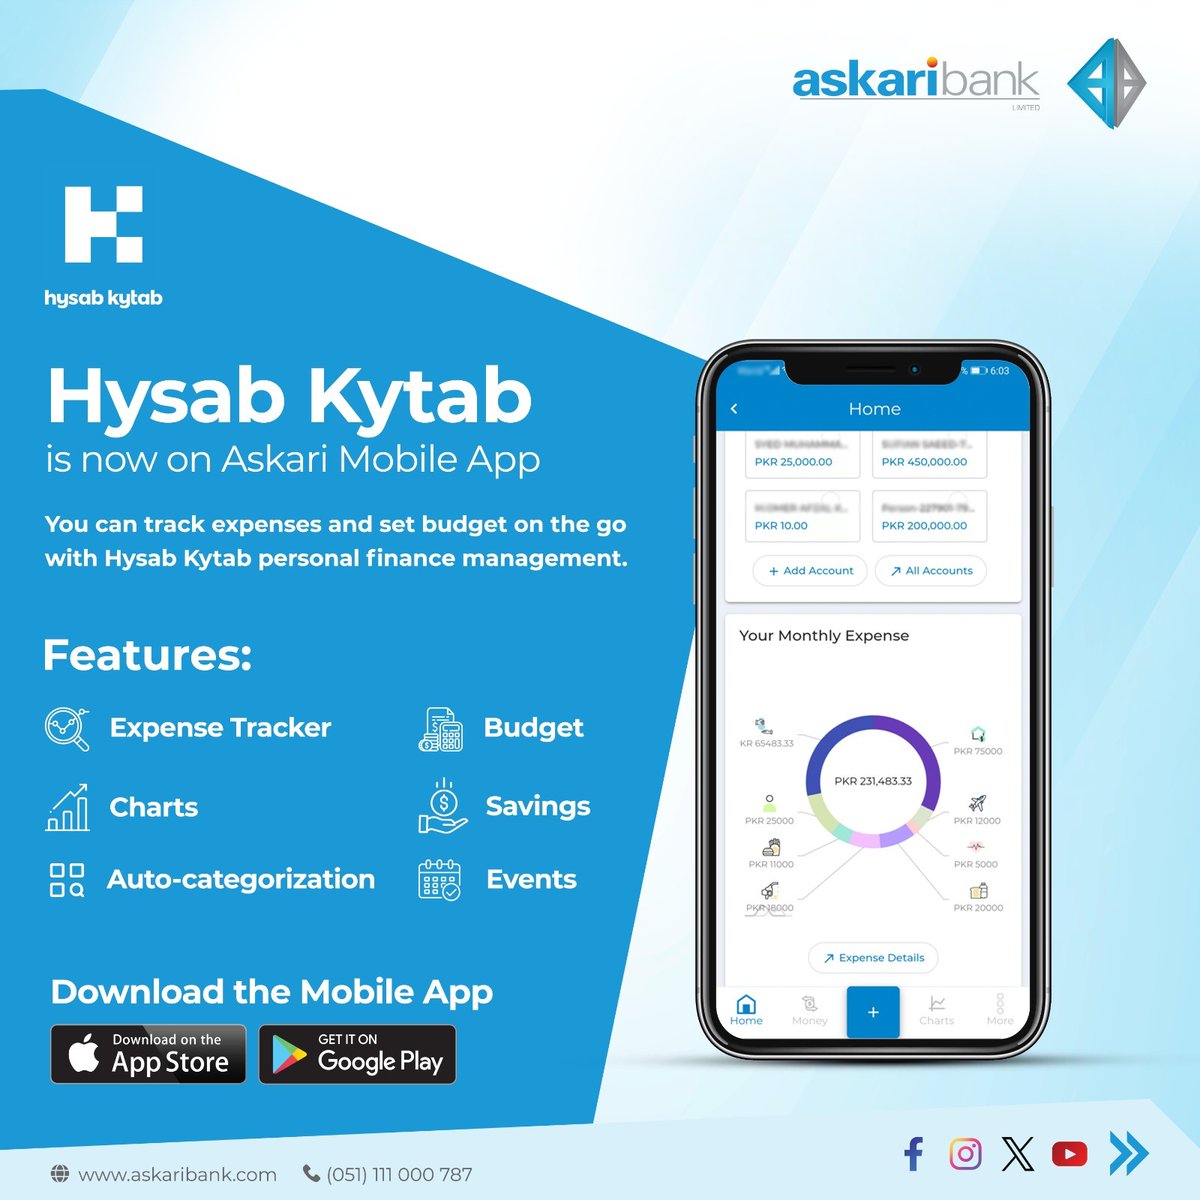 Get organized with Hysab Kytab, Askari Bank's innovative mobile app feature! Simplify your finances, track expenses, and stay on top of your budget effortlessly. Download our app now!

#AskariBankApp #HysabKytab #budgeting #convenient